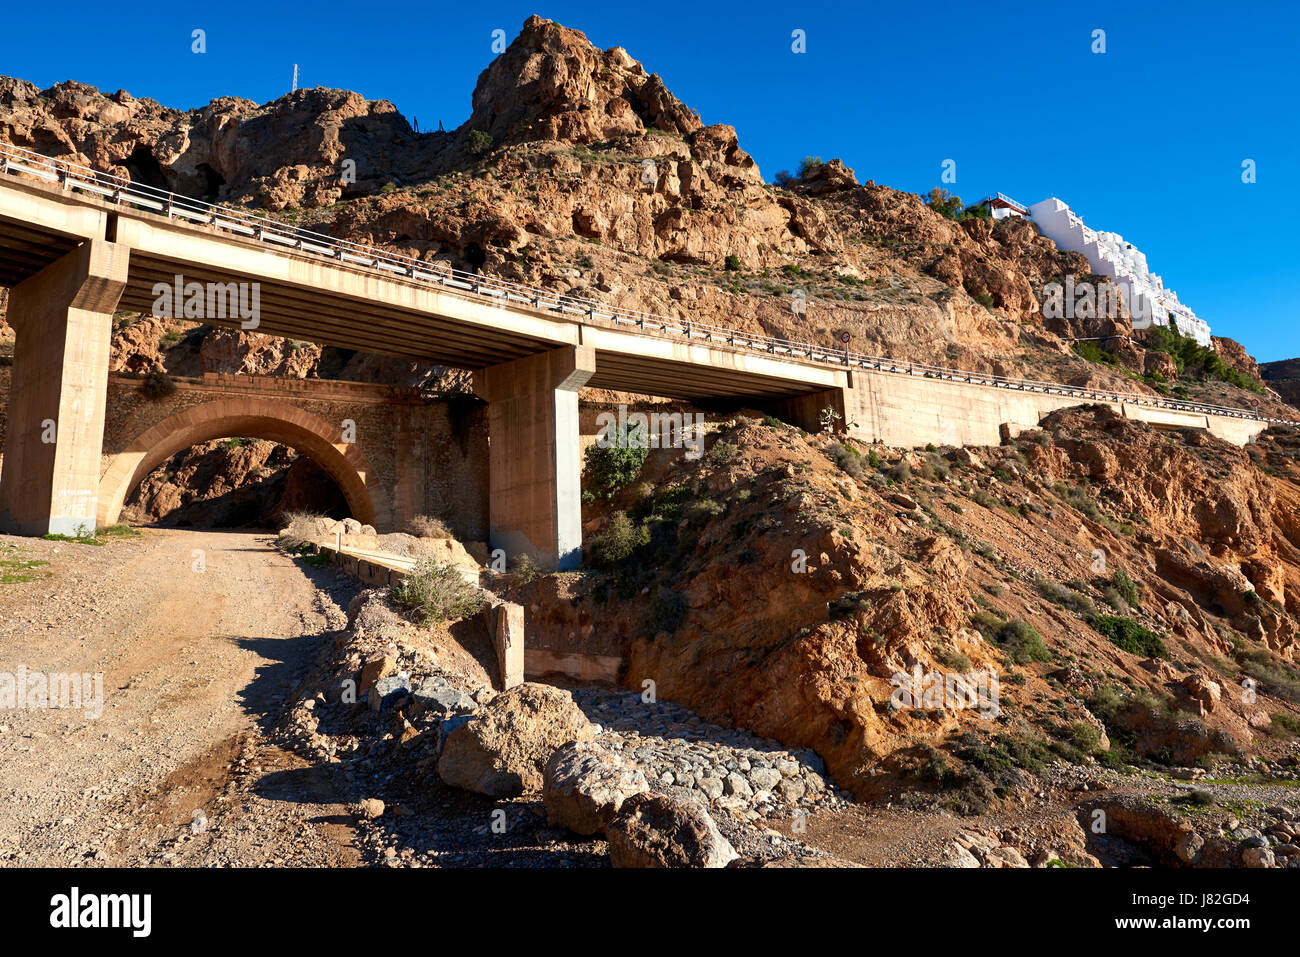 Viaduct between Aguadulce and Almeria cities. Southern Spain Stock Photo